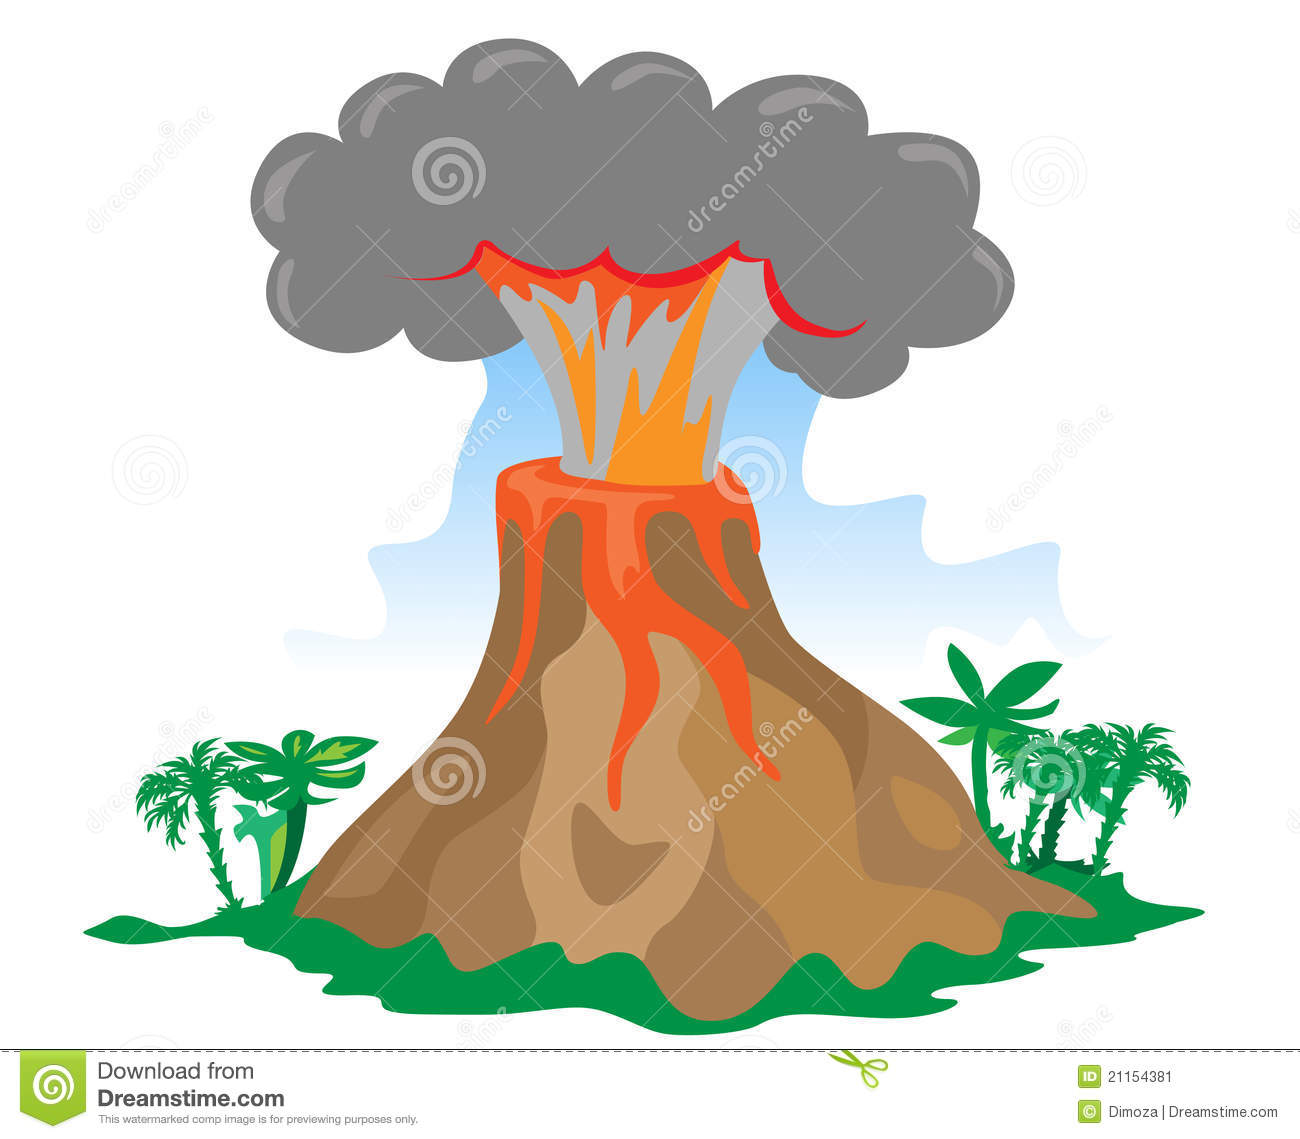 Volcano Clip Art Black And White   Clipart Panda   Free Clipart Images